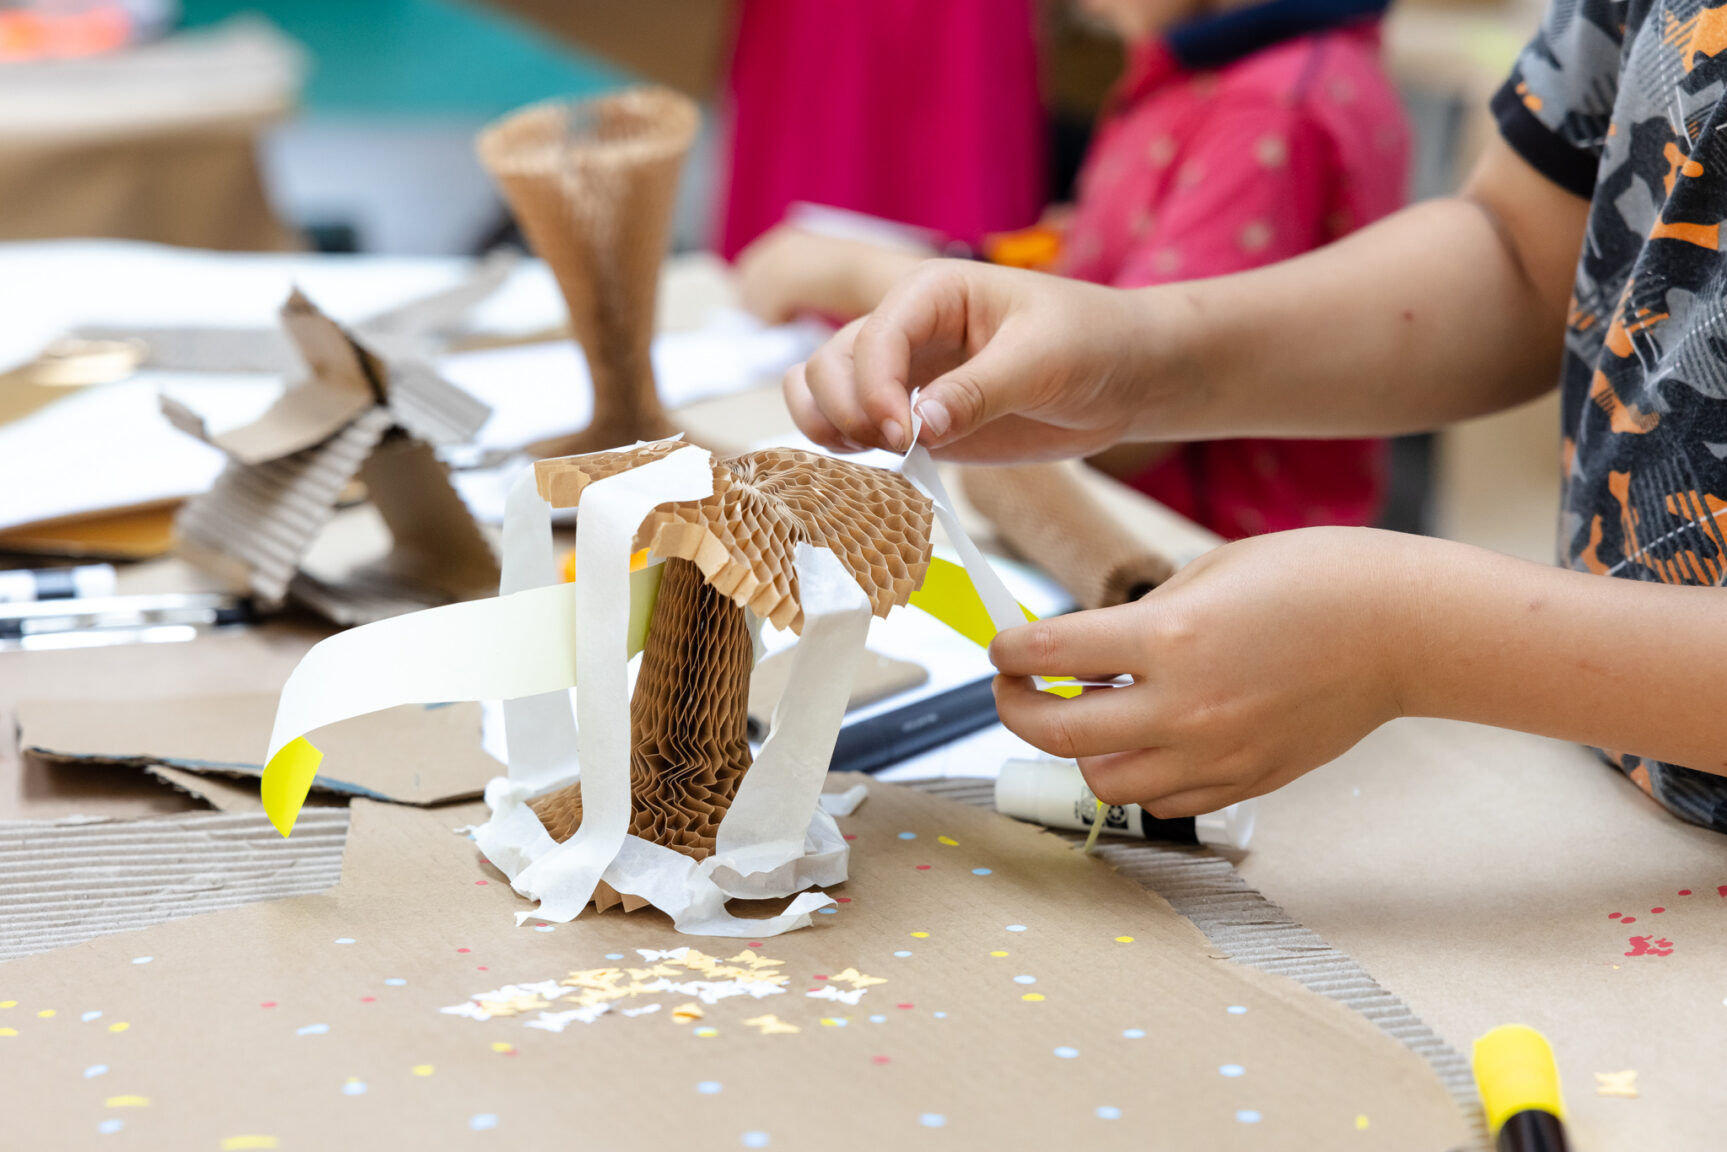 a child's hands working on a craft object made of paper and cardboard